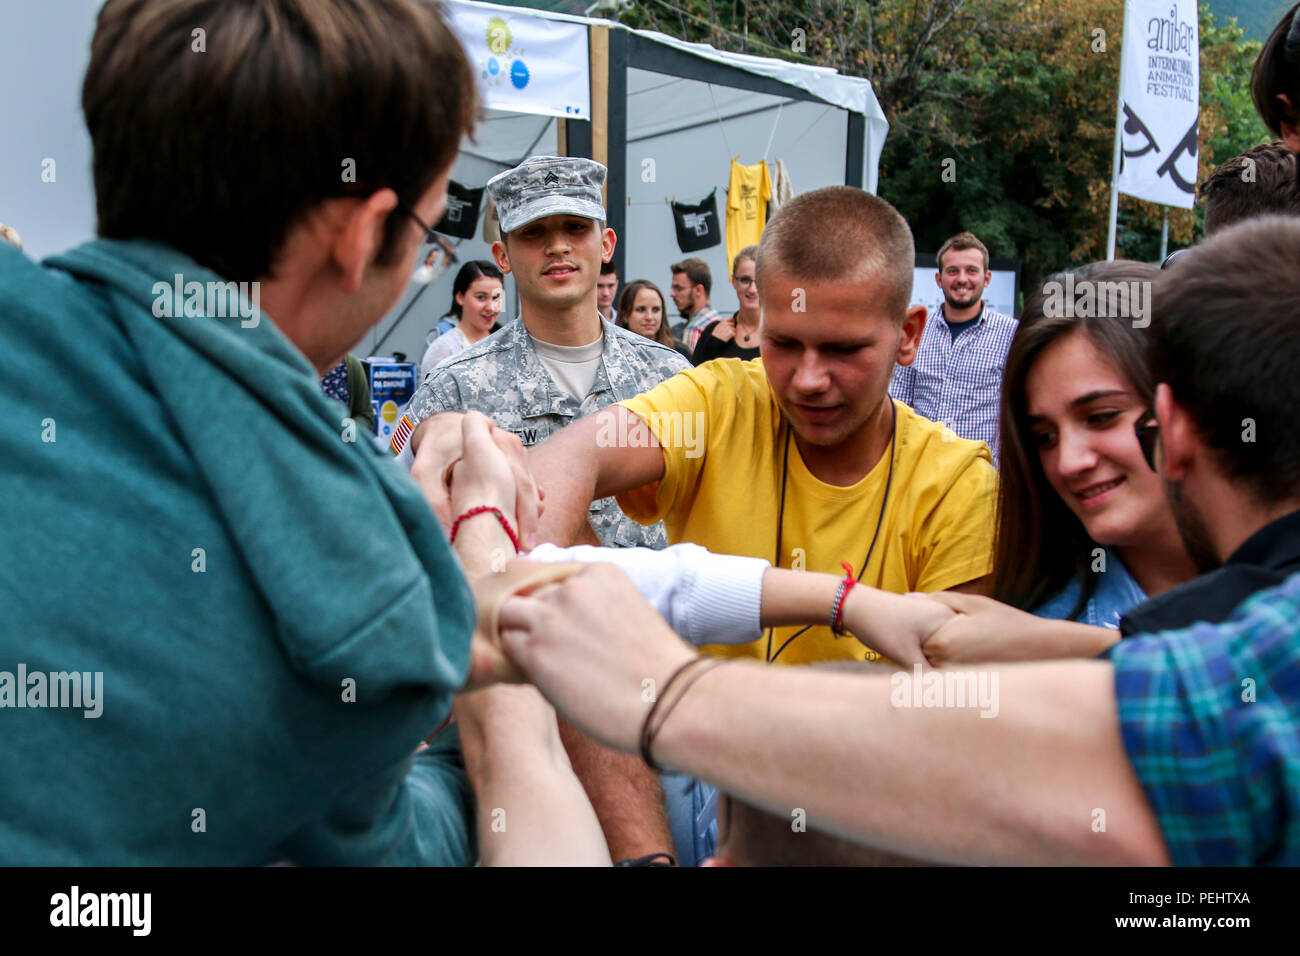 Sgt. Mark Leffew, a U.S. Army Reserve Soldier deployed to Kosovo with the 345th Combat Support Hospital, watches as a group of festival-goers try to untangle themselves while playing a 'human knot' game Aug. 22, 2015, in the main square of Peja, Kosovo, during the sixth annual Anibar International Animation Festival. Leffew volunteered his time to support the Pristina Rotary Club’s Violence-Free Future project, which aims to promote pro-social behaviors among Kosovo’s youth. Leffew and the 345th CSH serve as Multinational Battle Group-East’s Task Force Medical, serving on the 20th iteration of Stock Photo